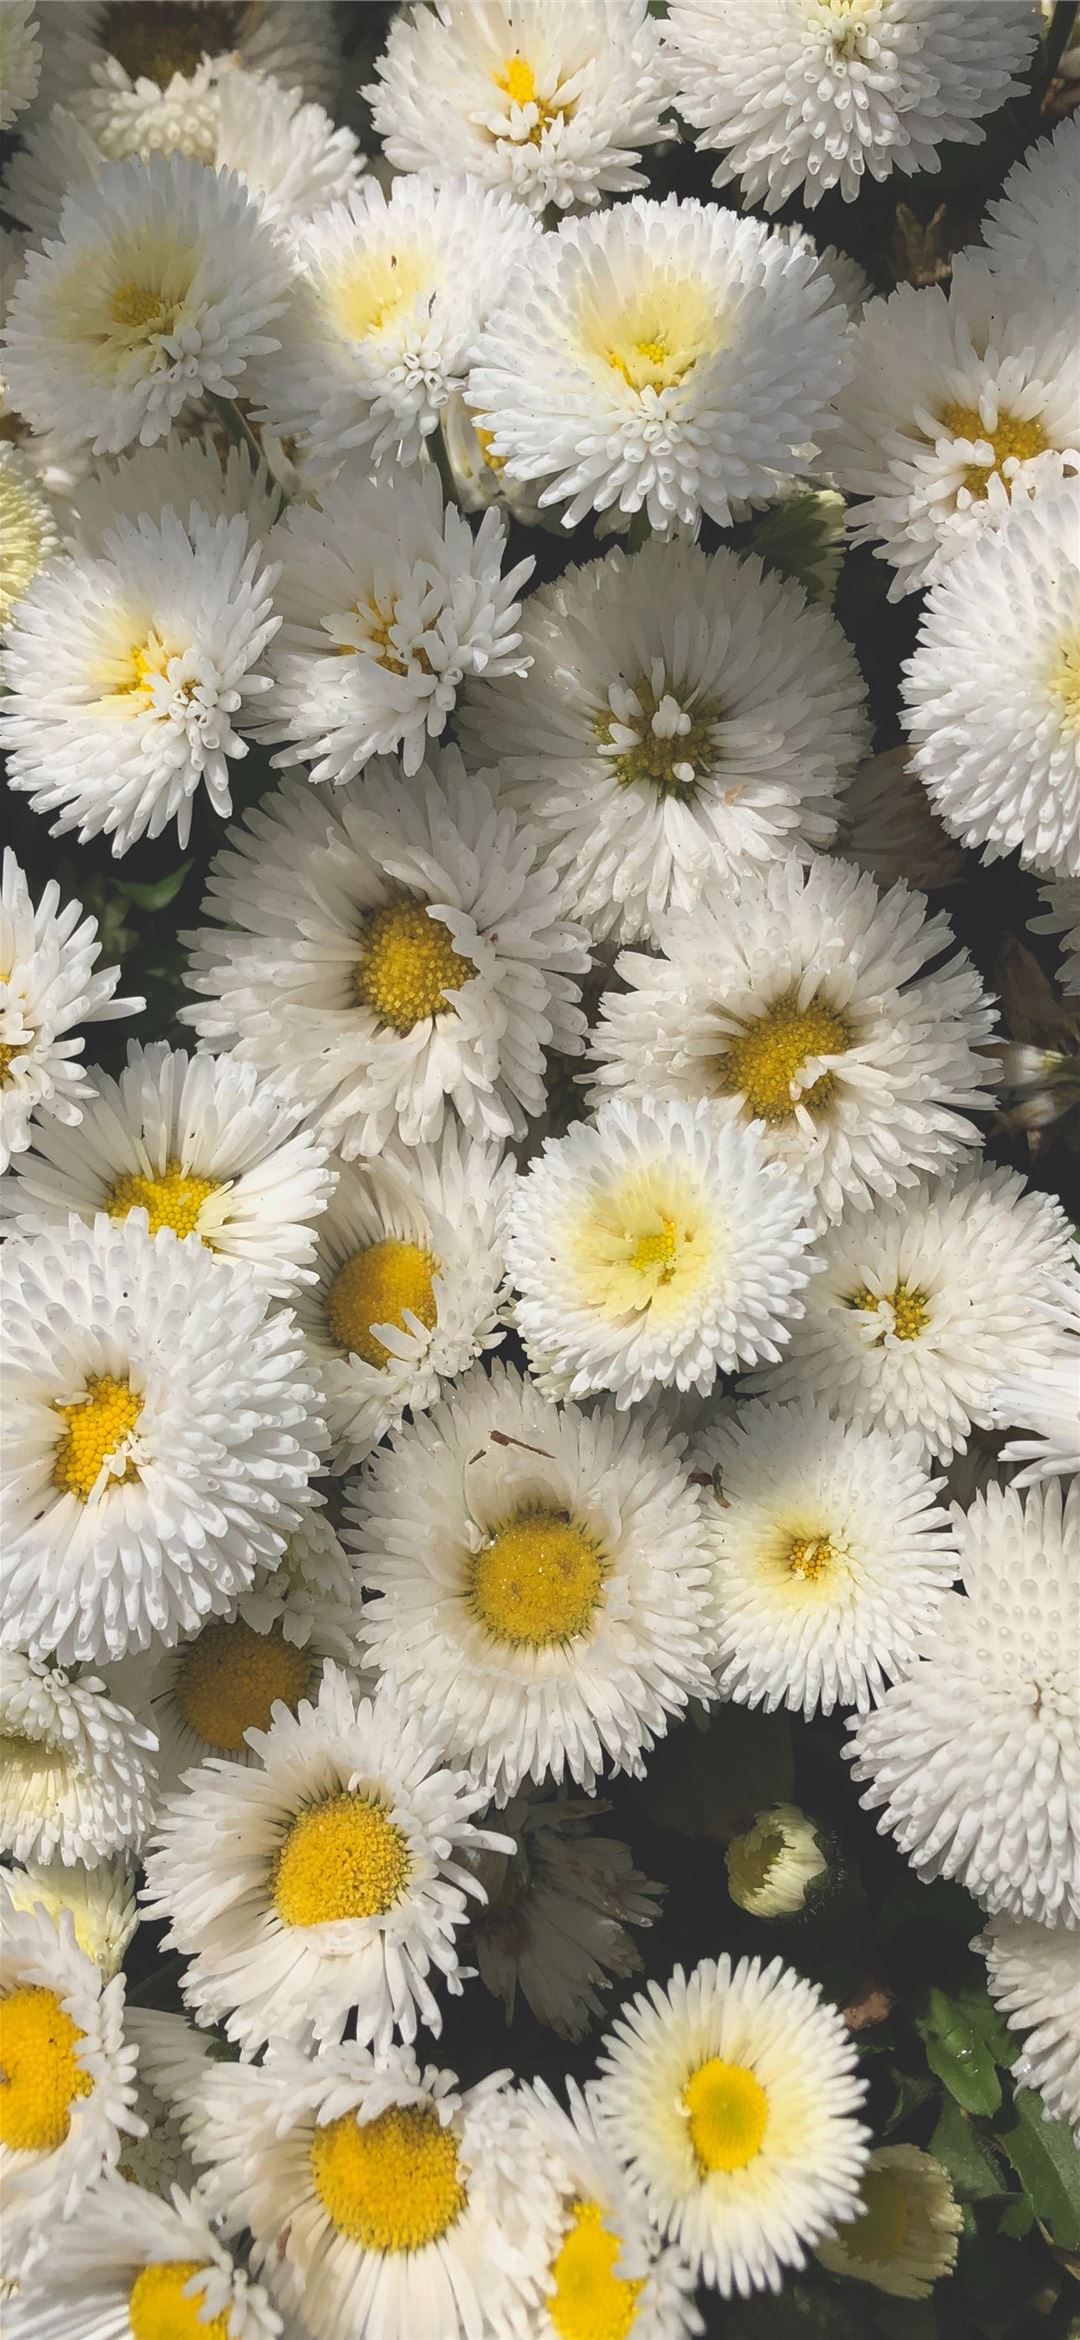 A close up of some white flowers - Flower